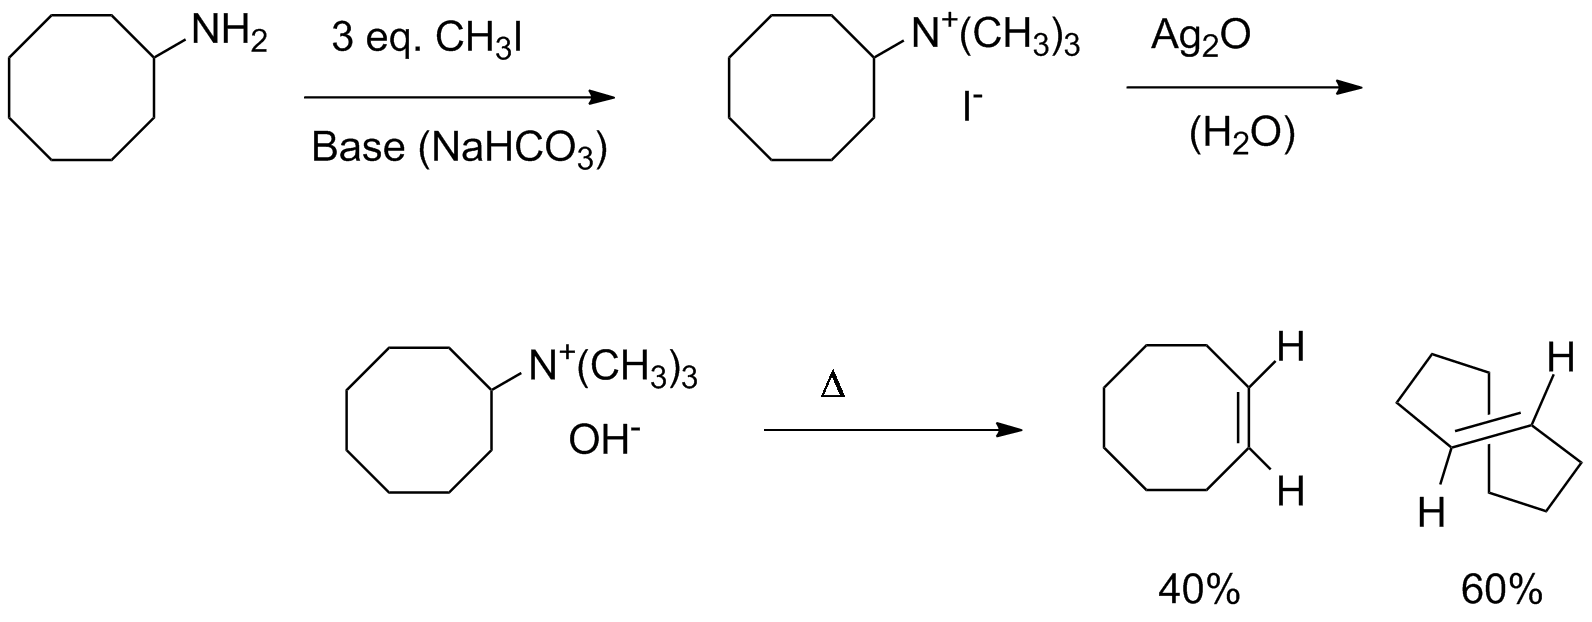 Hoffmann reaction sequence, starting from aminocyclooctene.  3 eq. CH3I, with NaHCO3 as bas, makes the trimethylammonium iodide salt.  Then Ag2O replaces I- with HO-, and that base then does an E2 elimination to give a mixture of Z (40%) and E(60%)-cyclooctene.